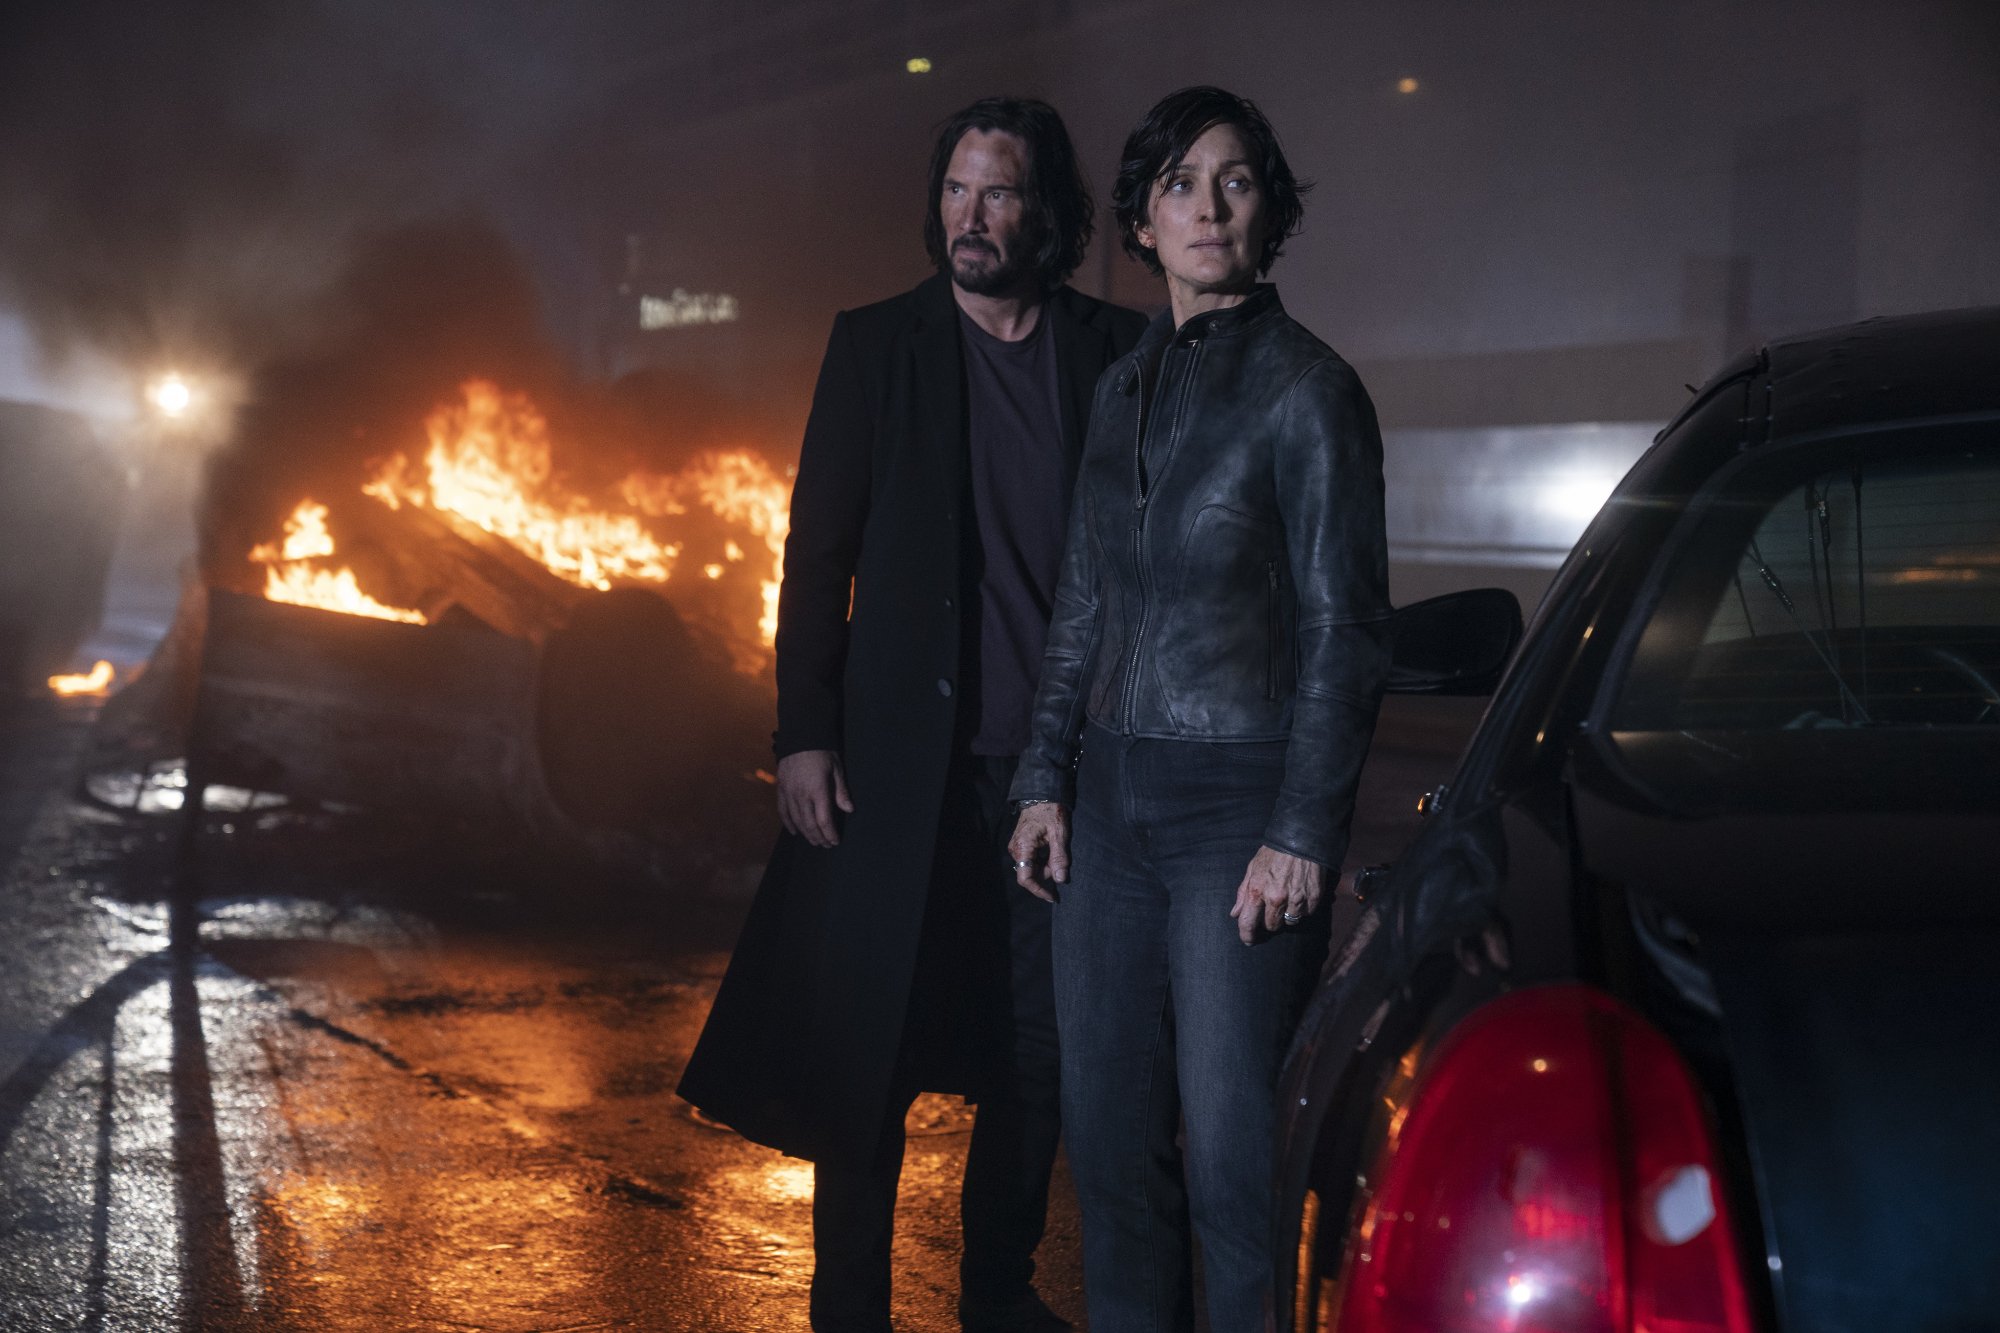 'The Matrix Resurrections' Keanu Reeves as Neo and Carrie-Anne Moss as Trinity after dive bomb climax looking around with a car on fire in the background